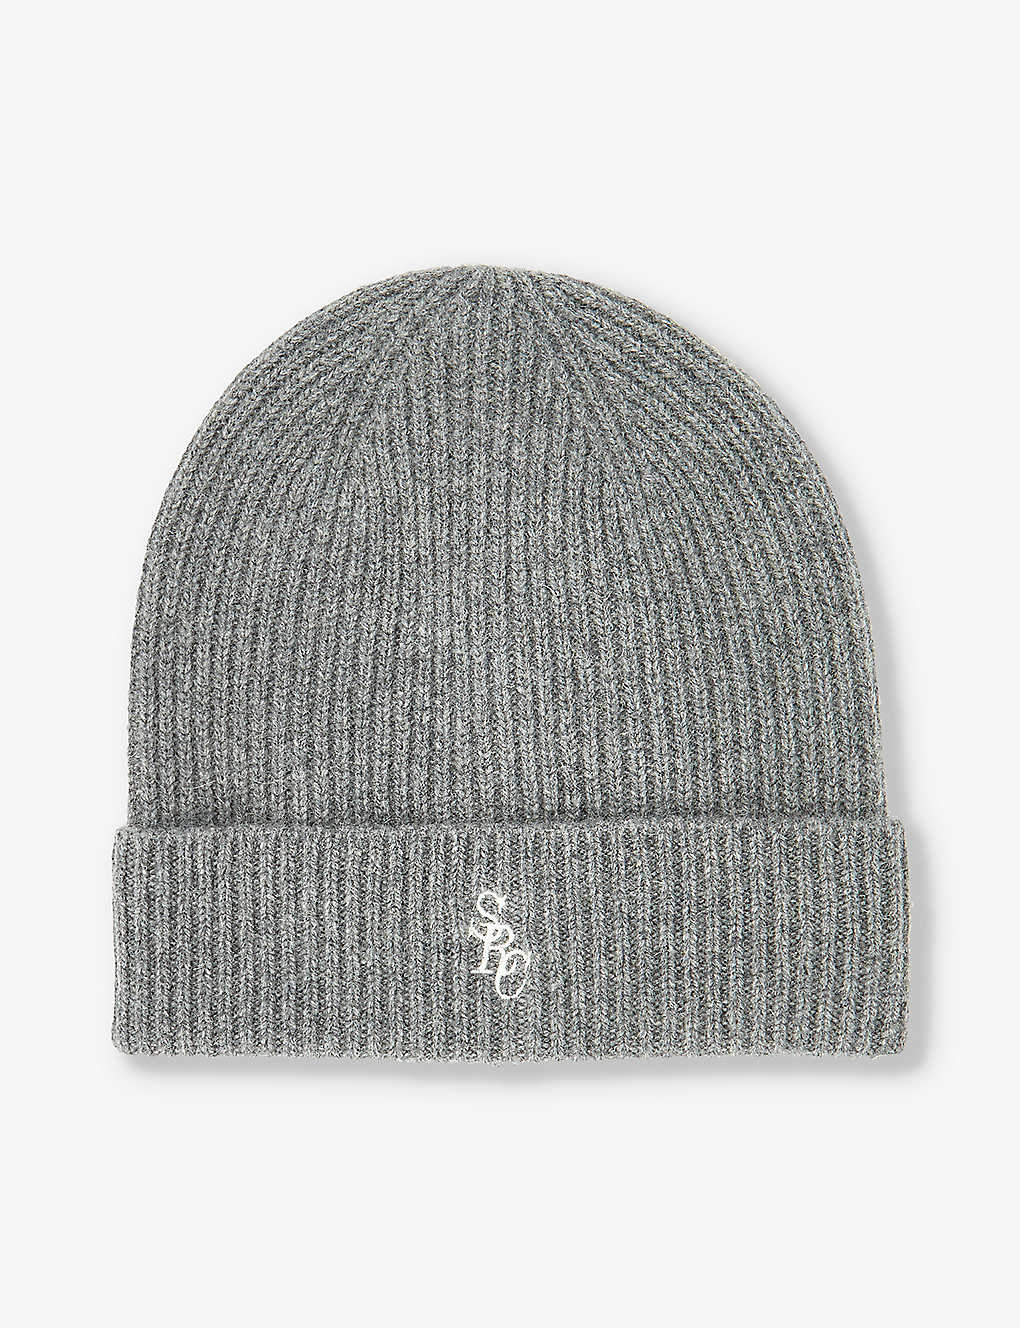 Sporty And Rich Brand-embroidered Cashmere Knitted Beanie Hat In Dark Grey